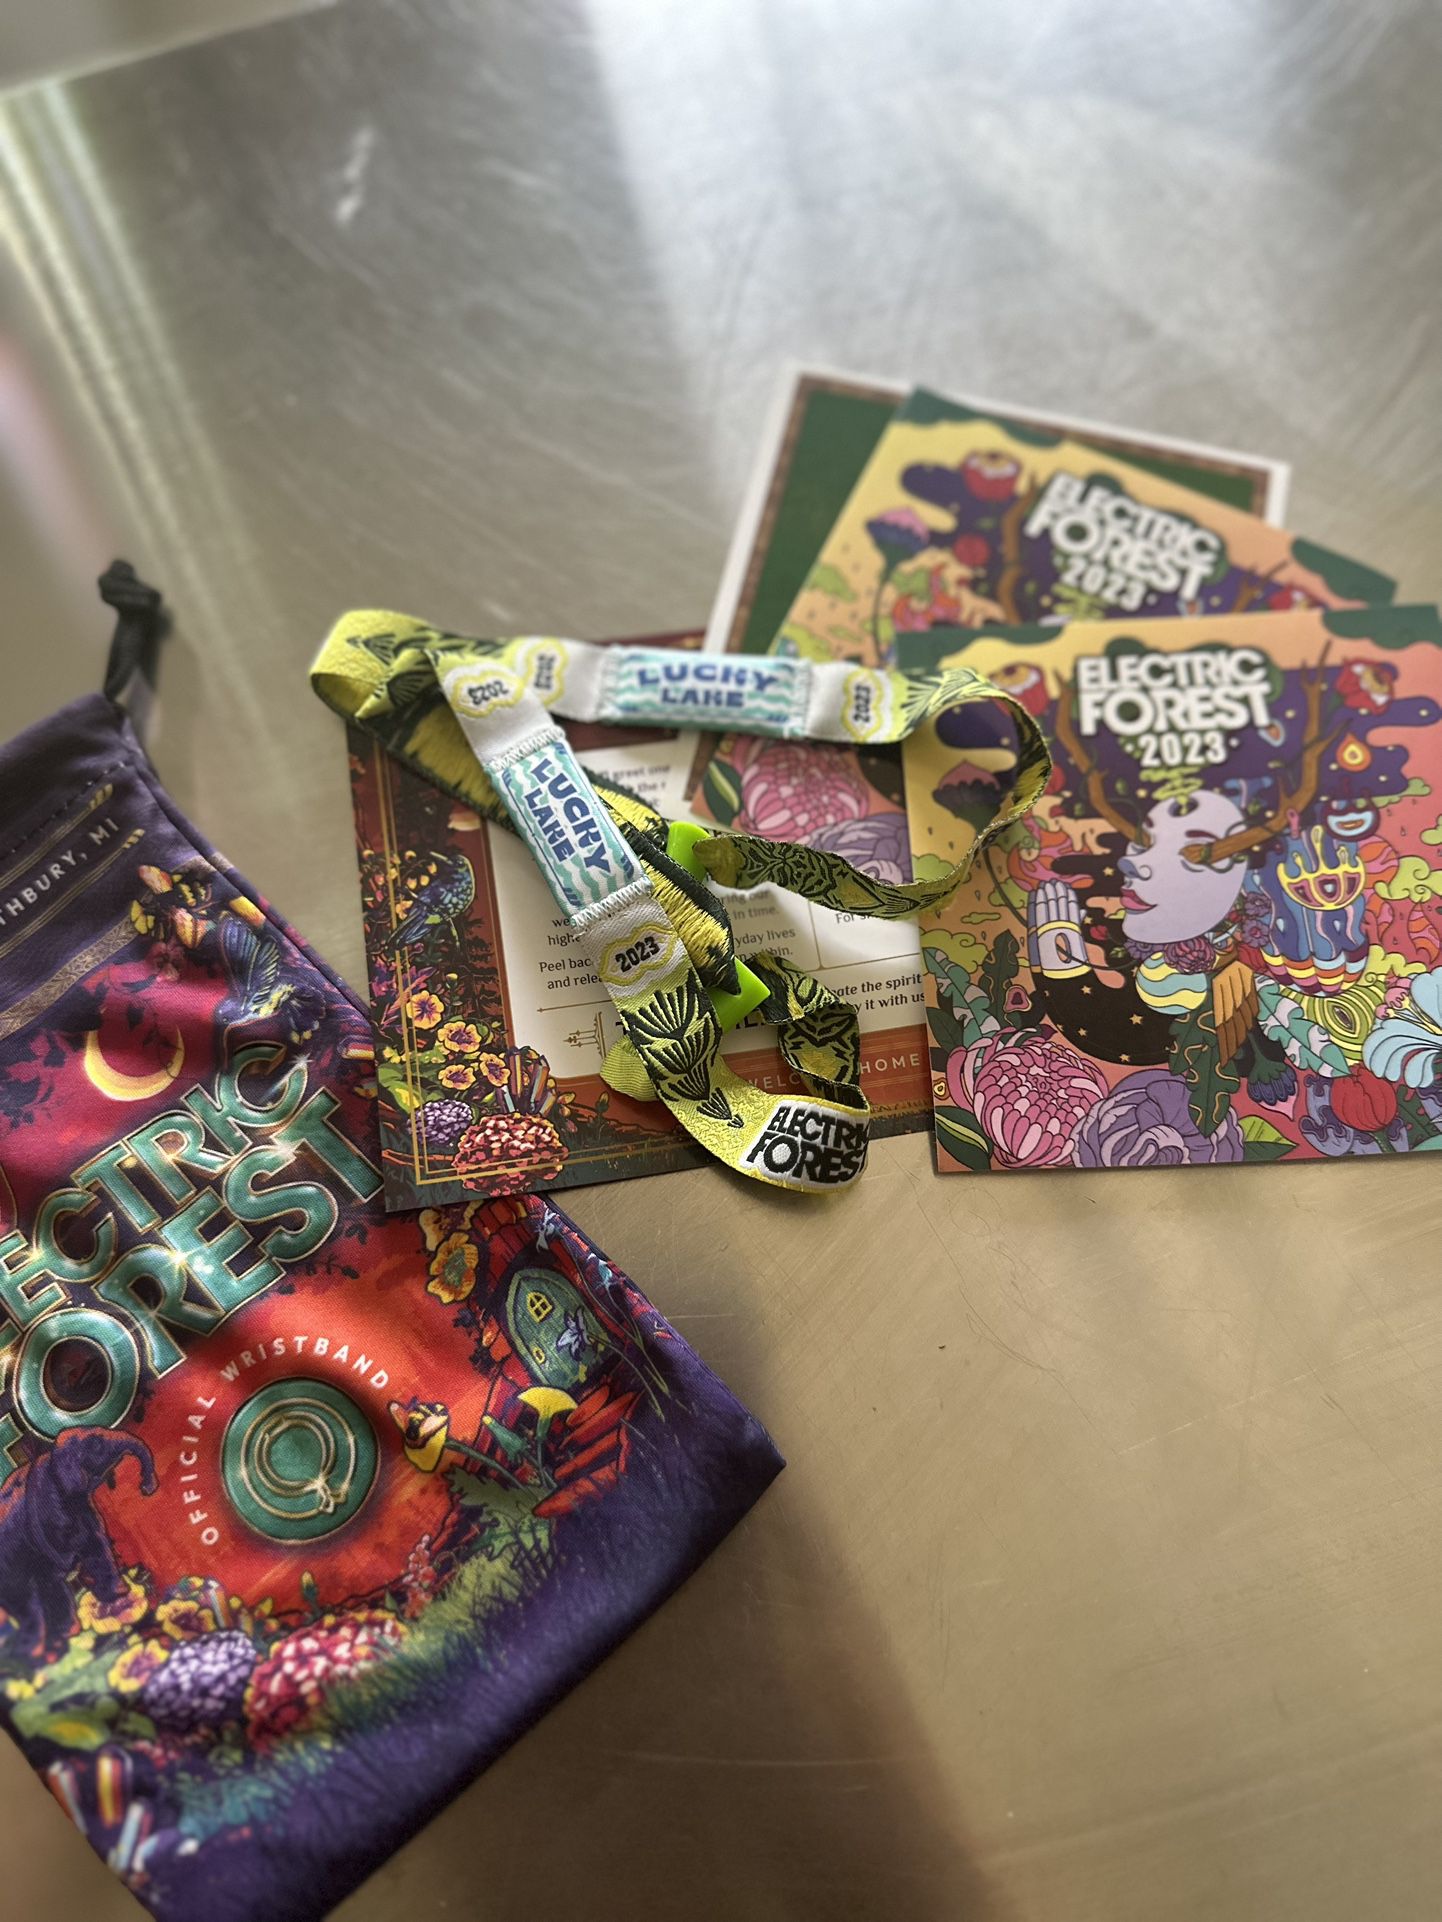 ELECTRIC FOREST FESTIVAL WRISTBANDS